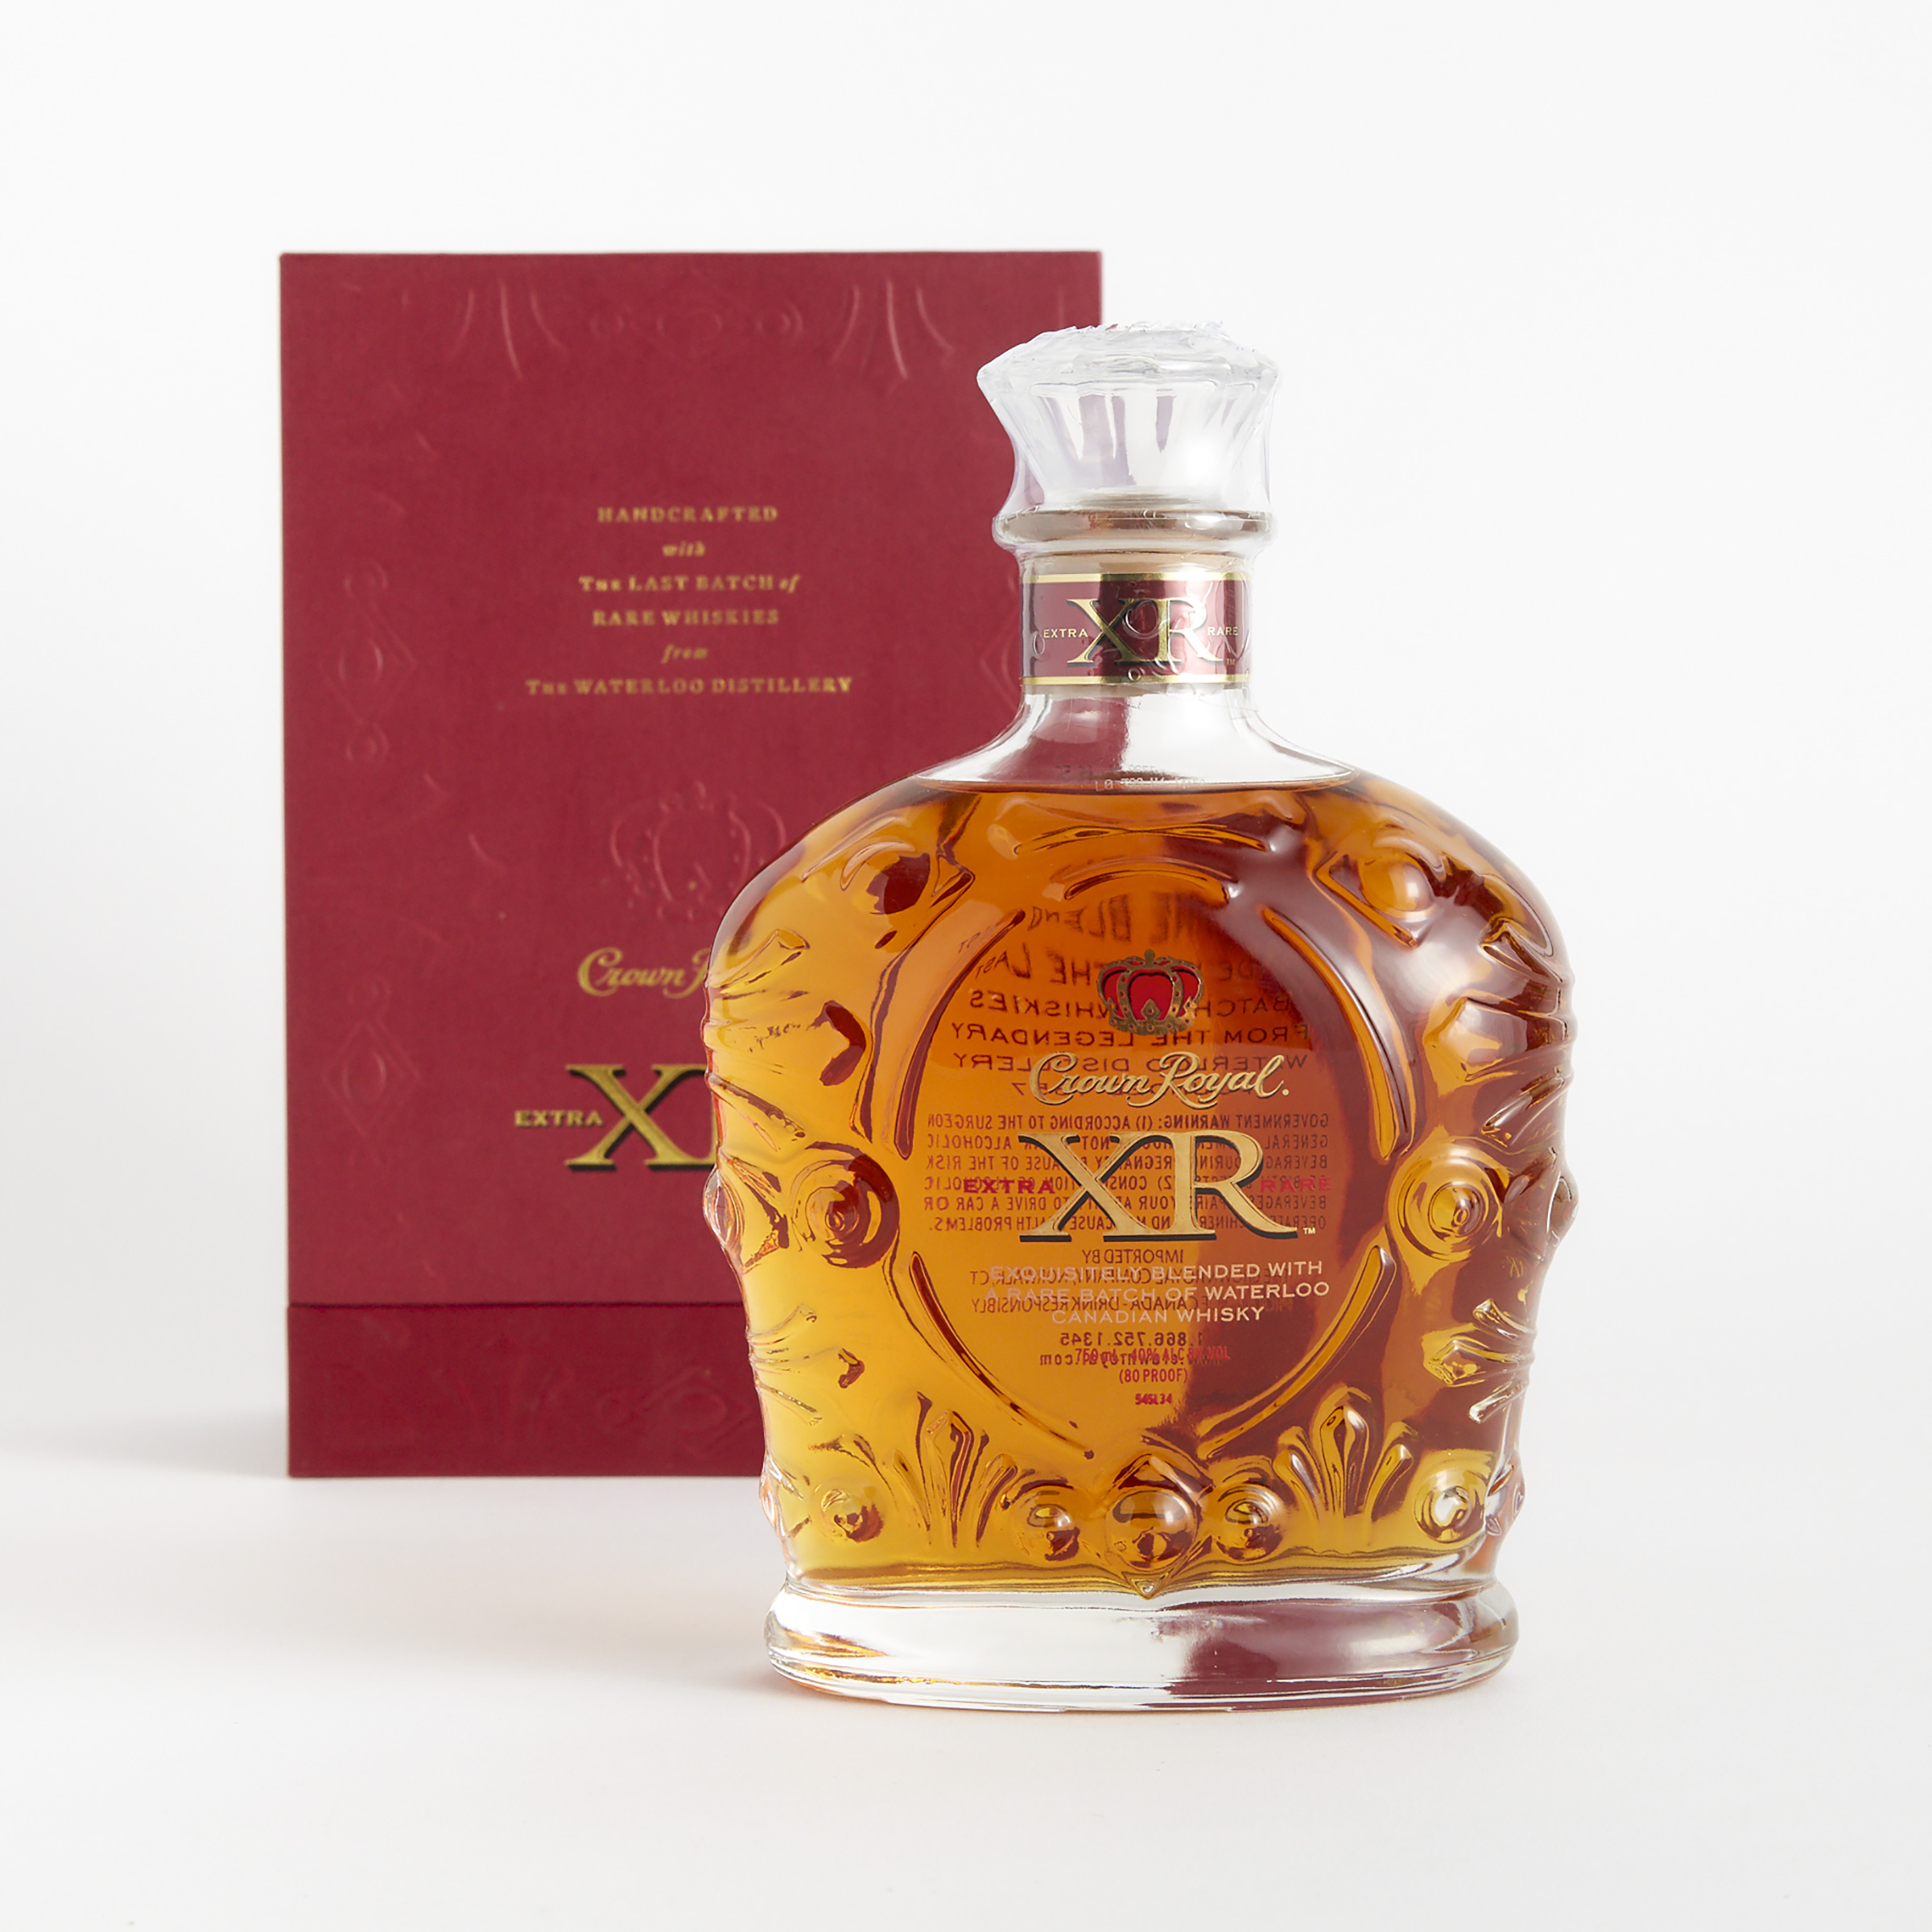 CROWN ROYAL EXTRA XR RARE BLENDED CANADIAN WHISKY NAS (ONE 750 ML)